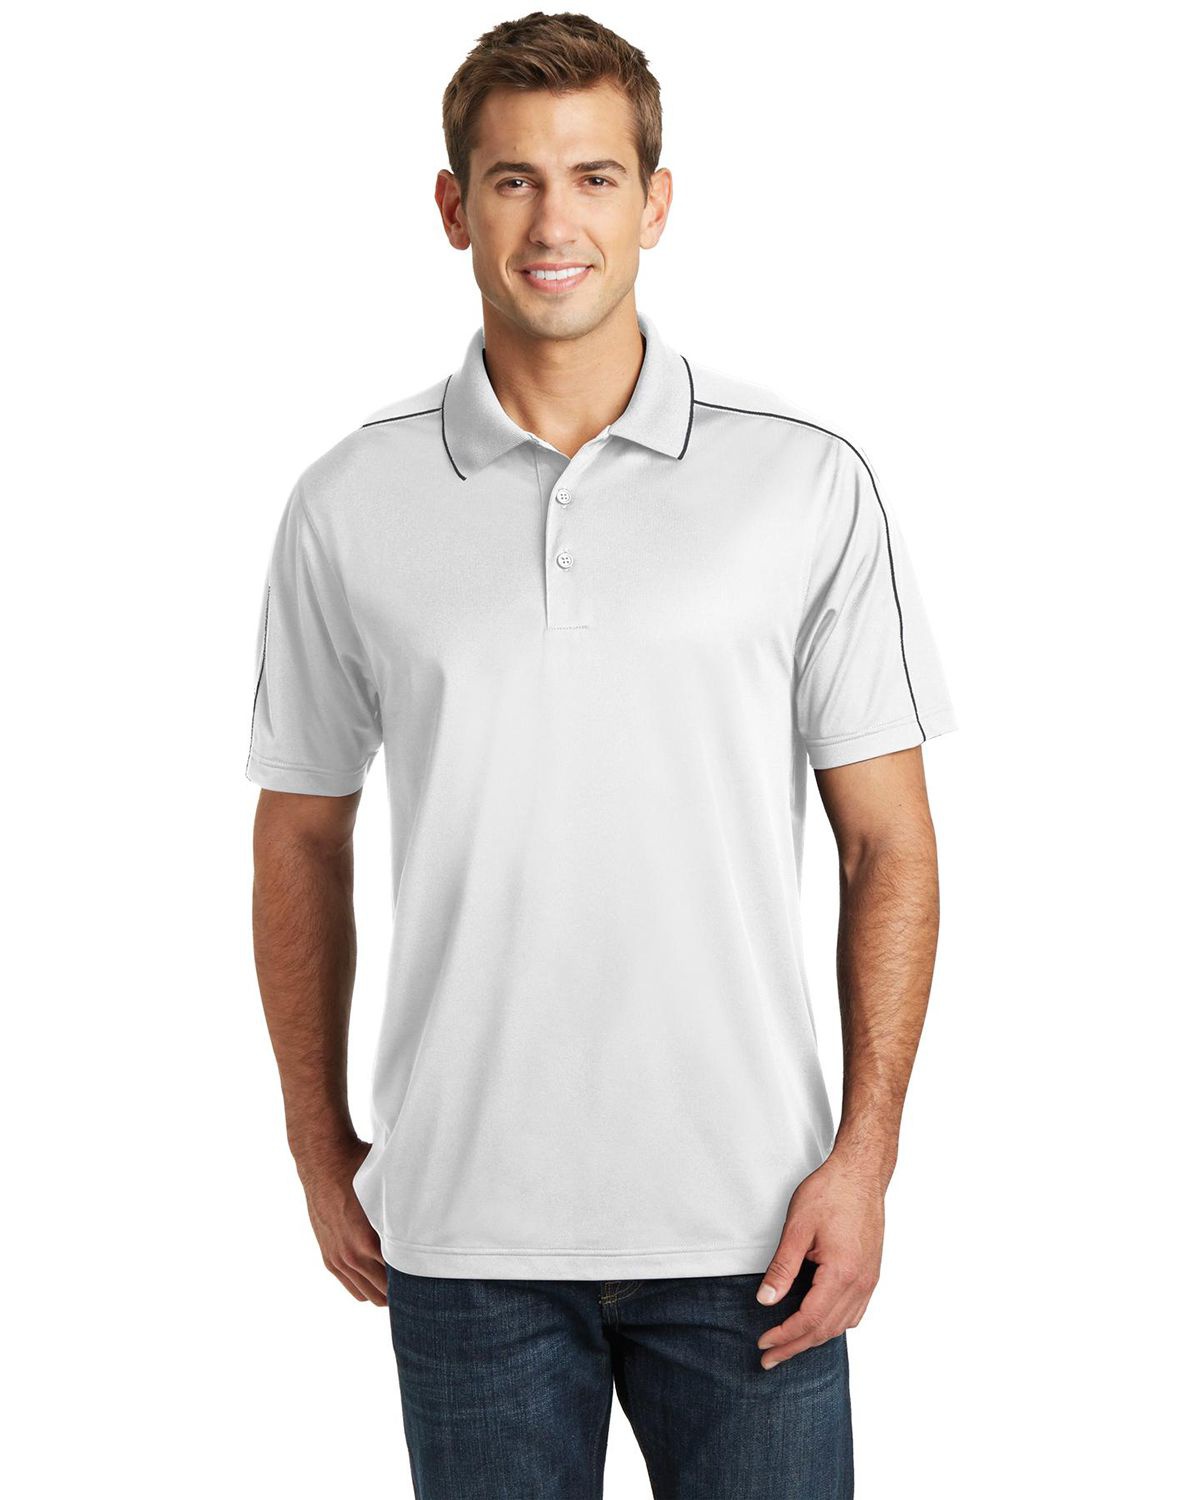 'Sport Tek ST653 Micropique Sport-Wick Piped Polo'